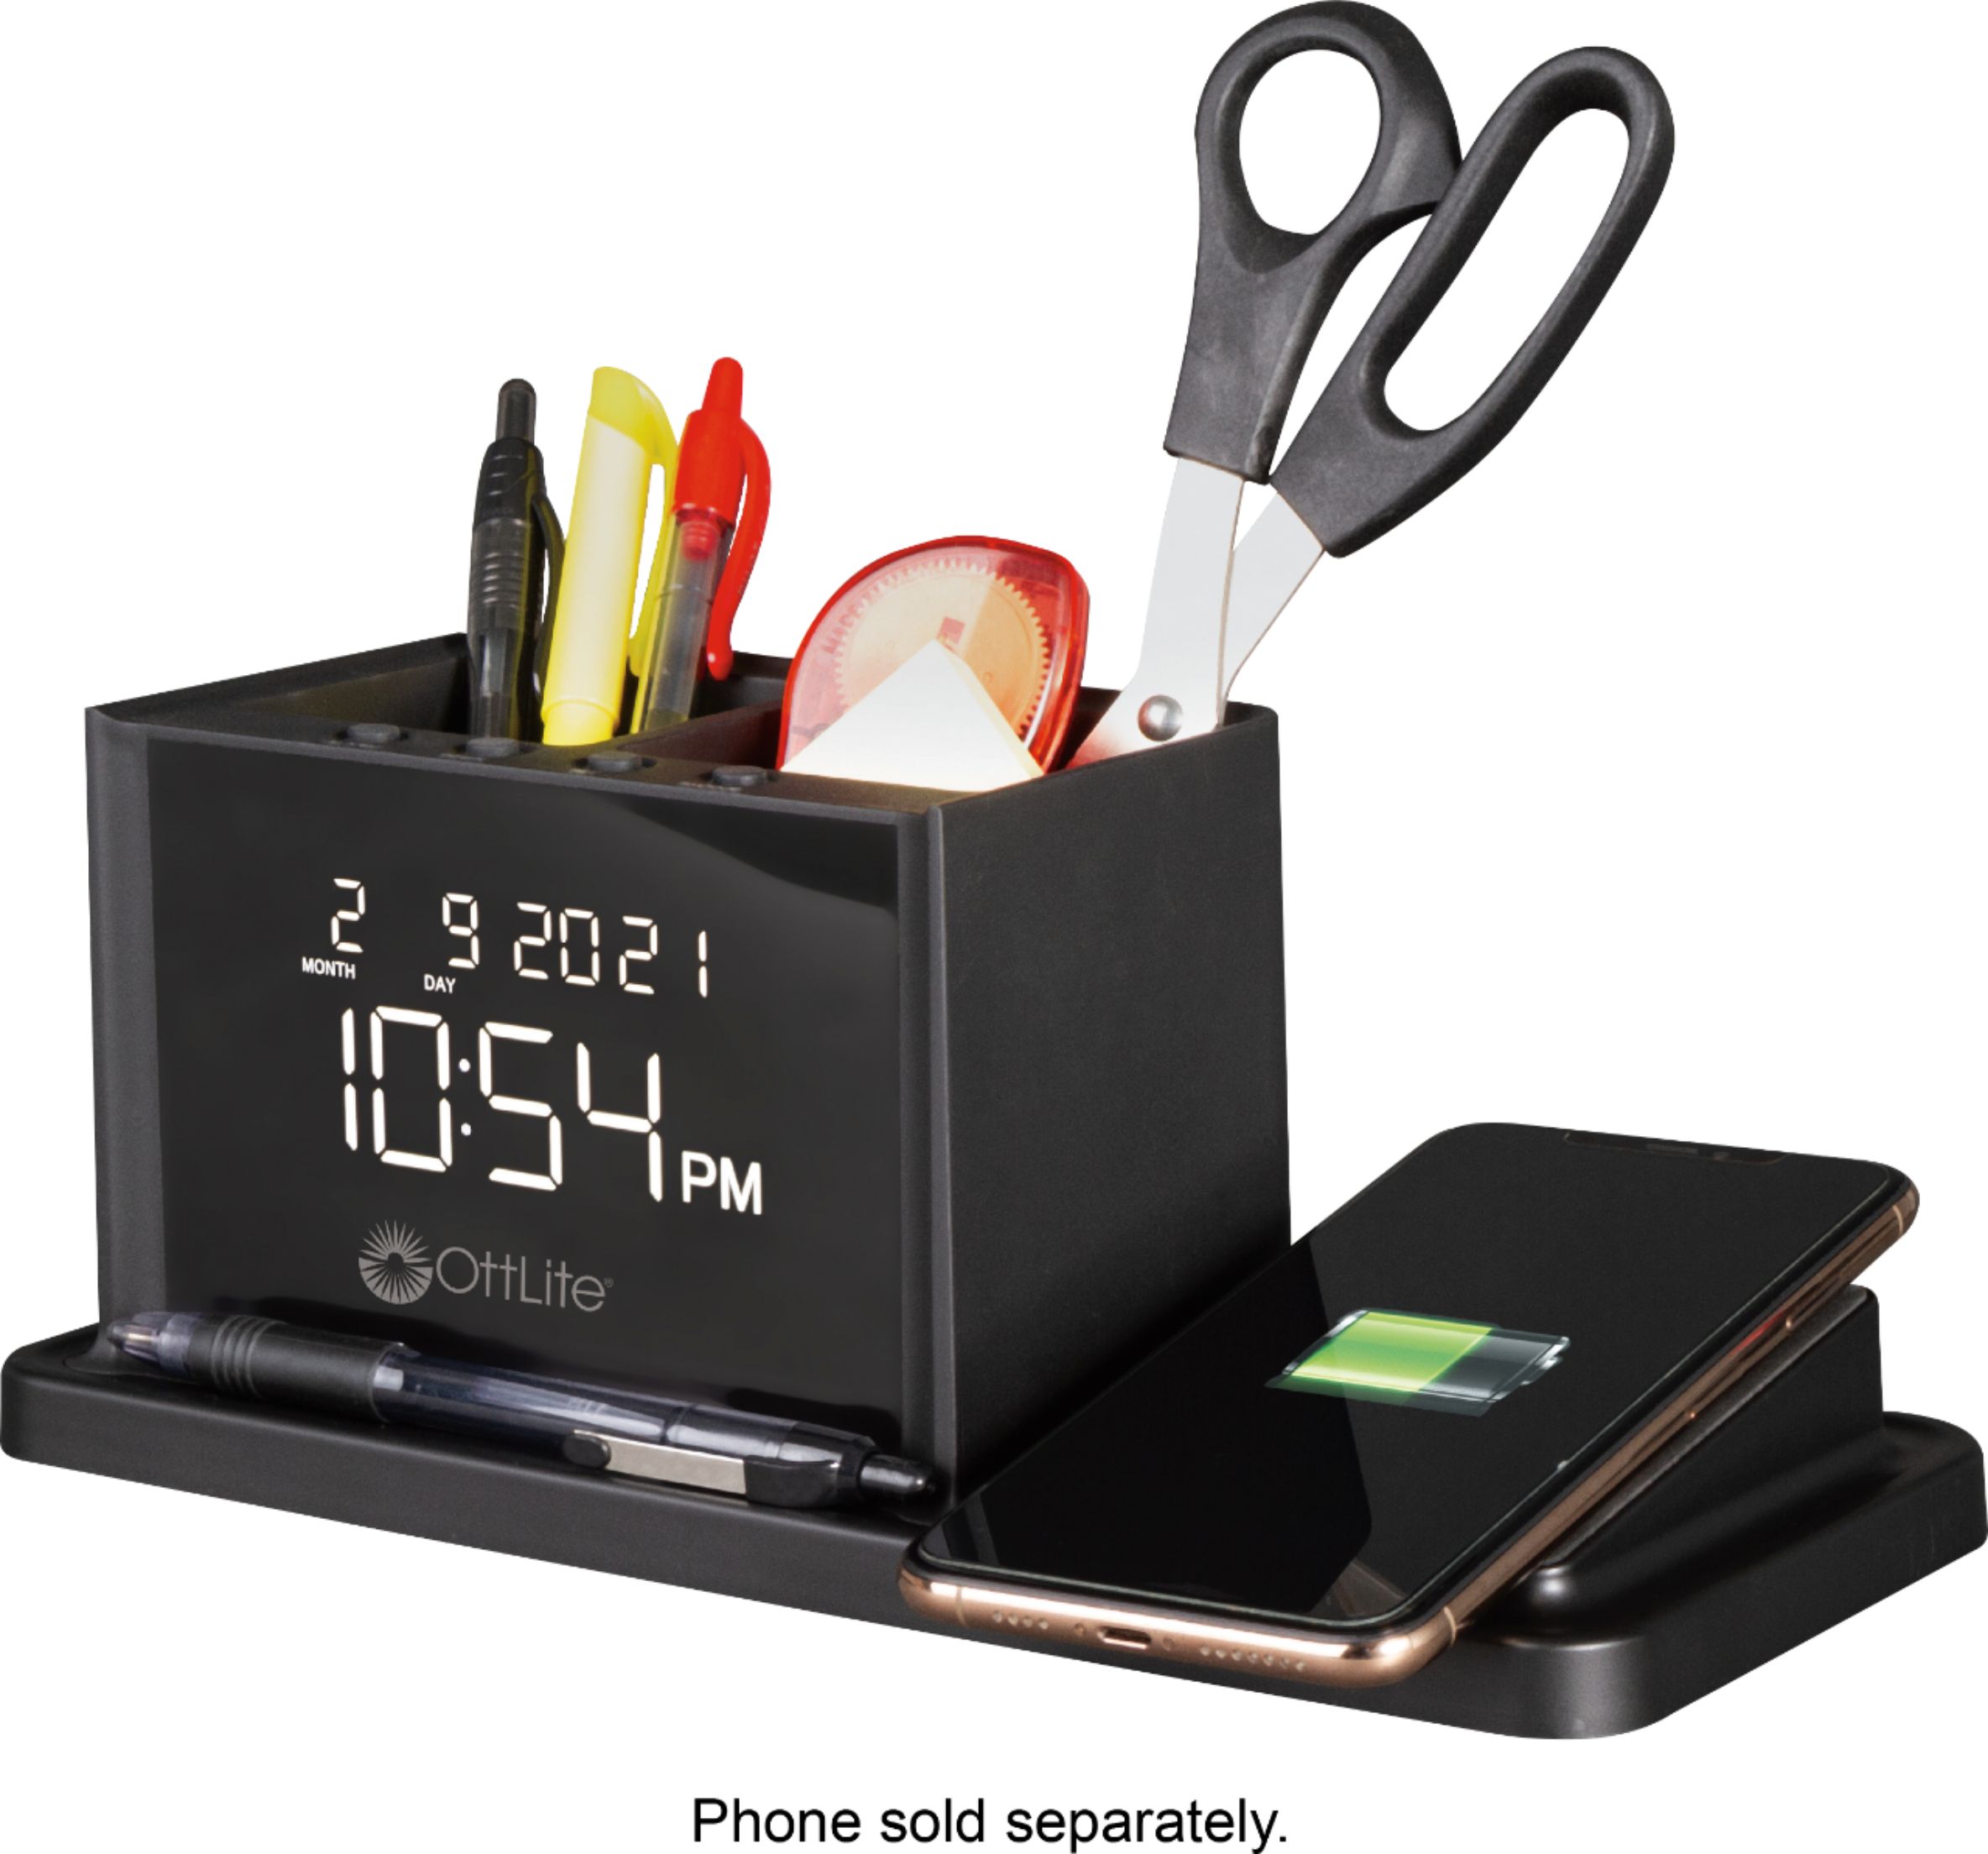 Angle View: OttLite - AO3G5T LCD Digital Alarm Clock with Organizer and Qi Wireless Charging